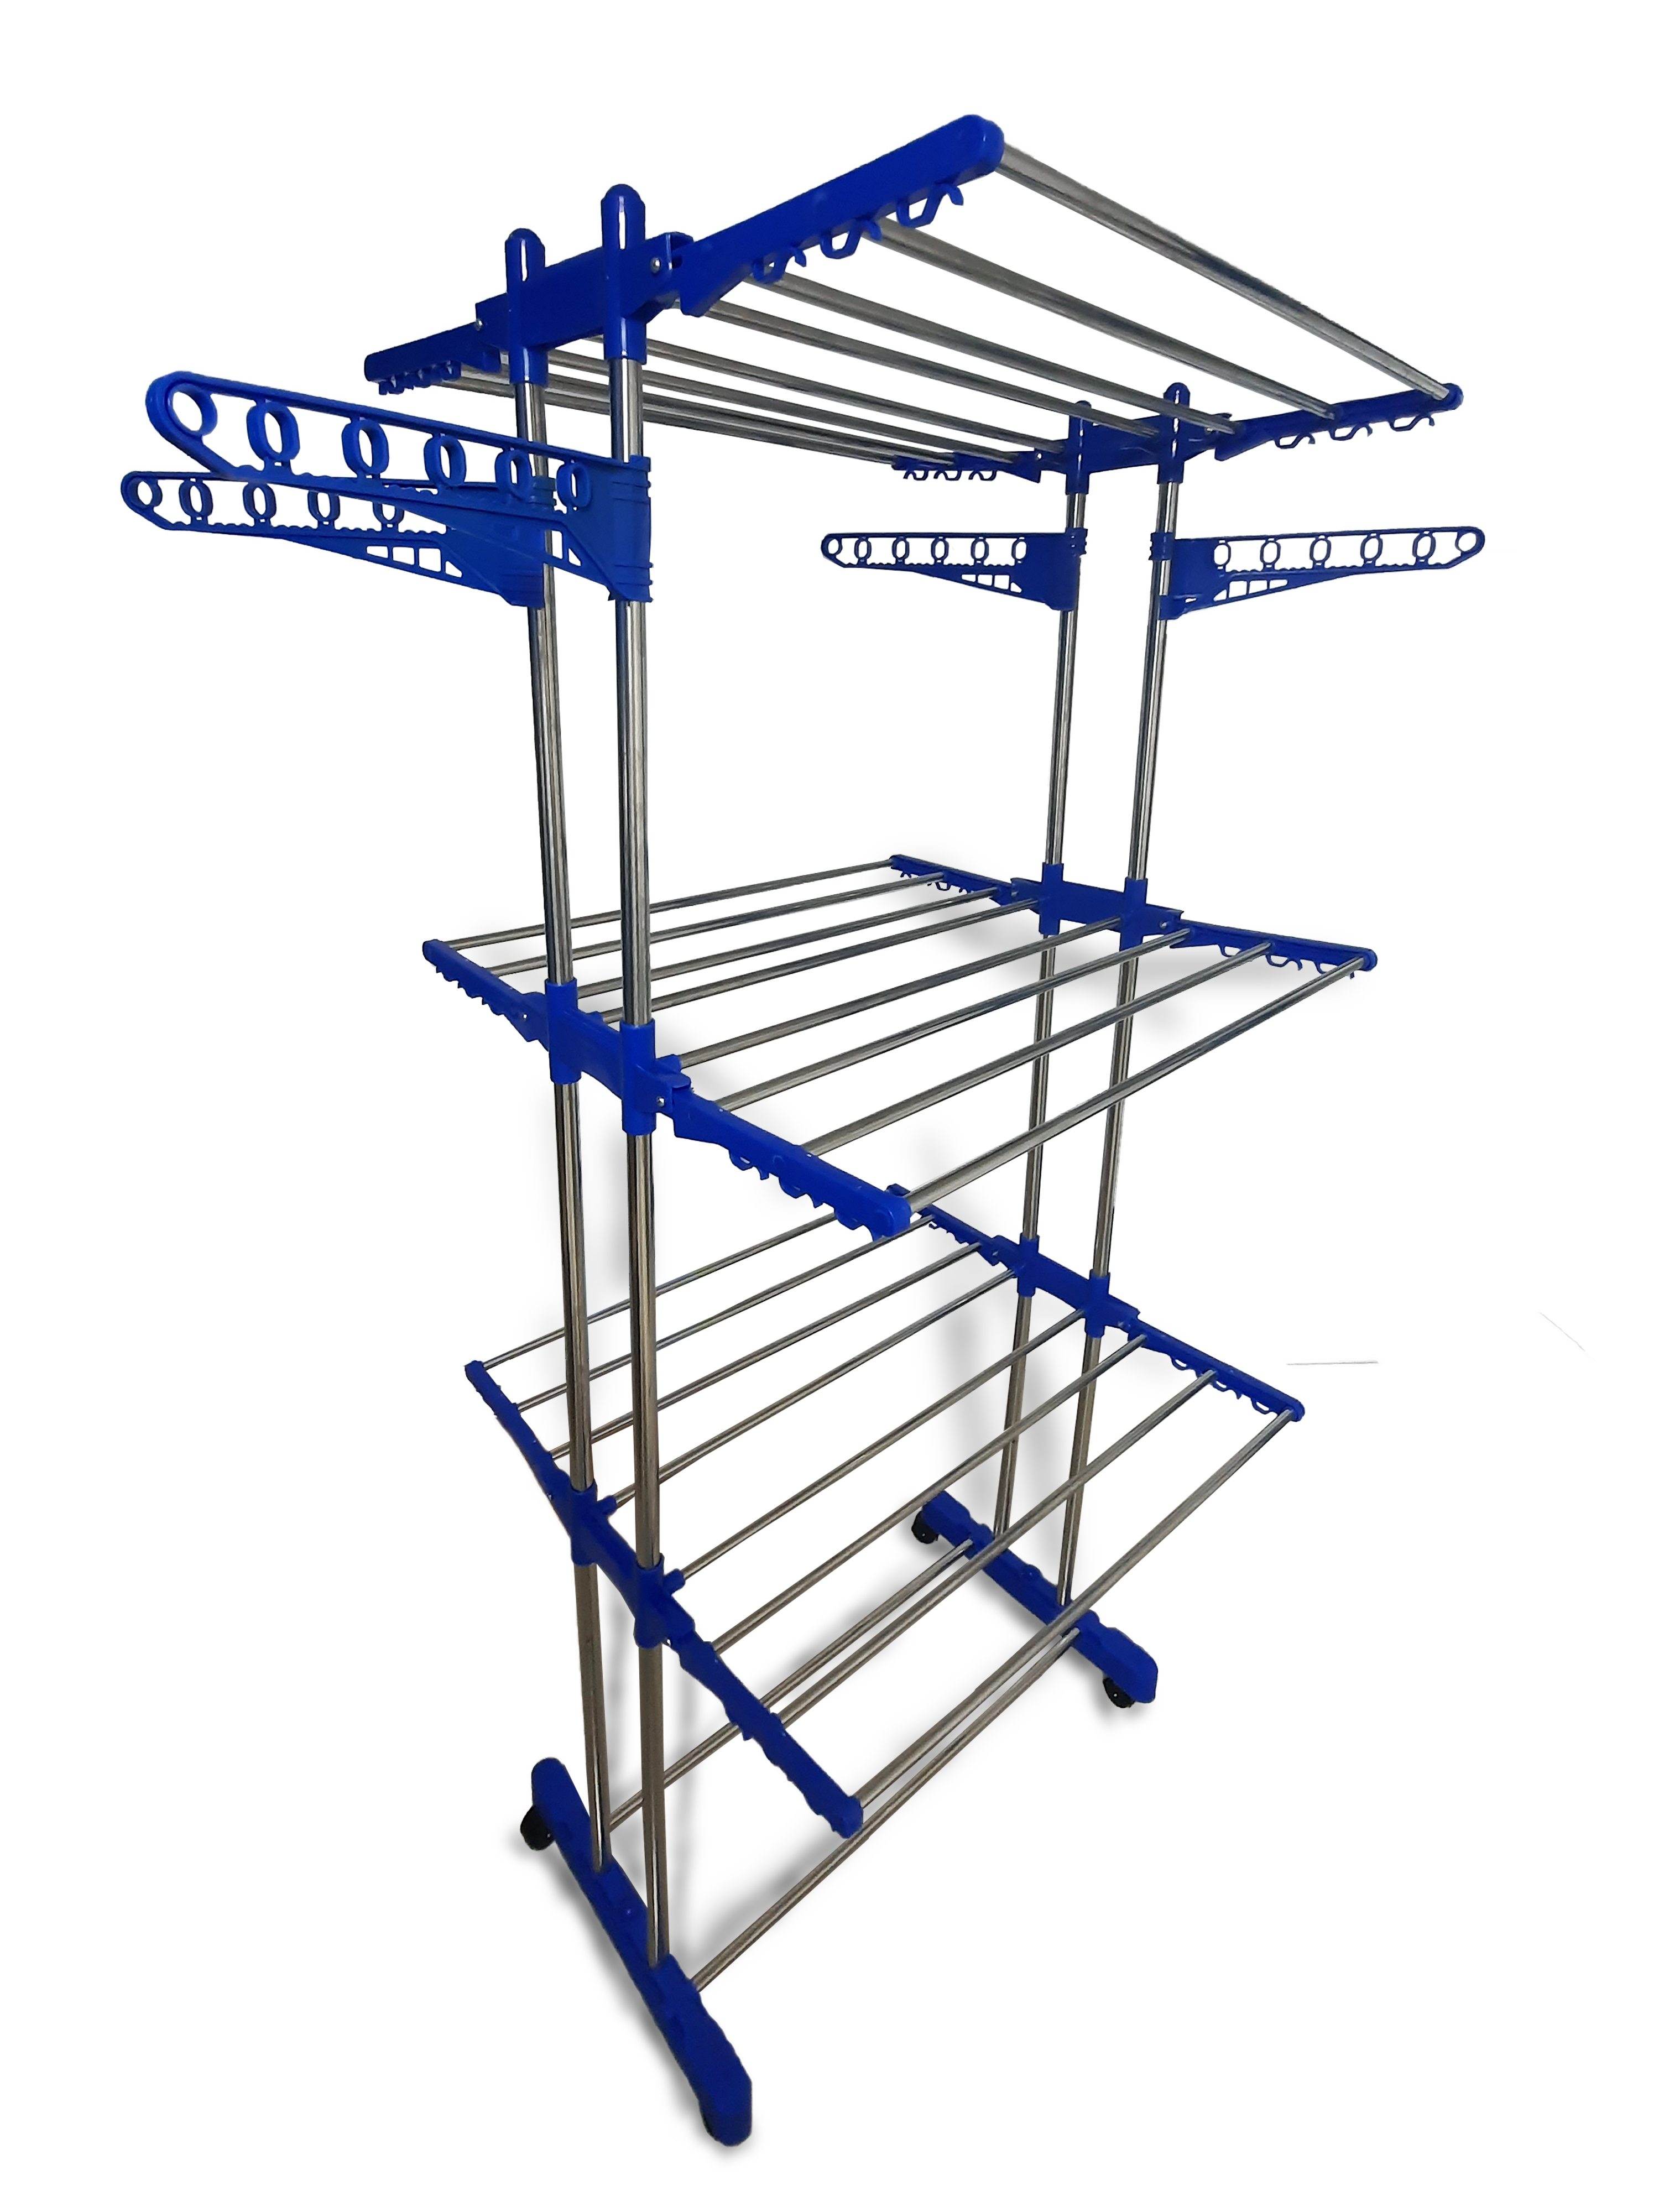 Kumaka Double Pole Cloth Drying Stand with Wheels Stainless Steel Indoor & Outdoor Use (Made in India)